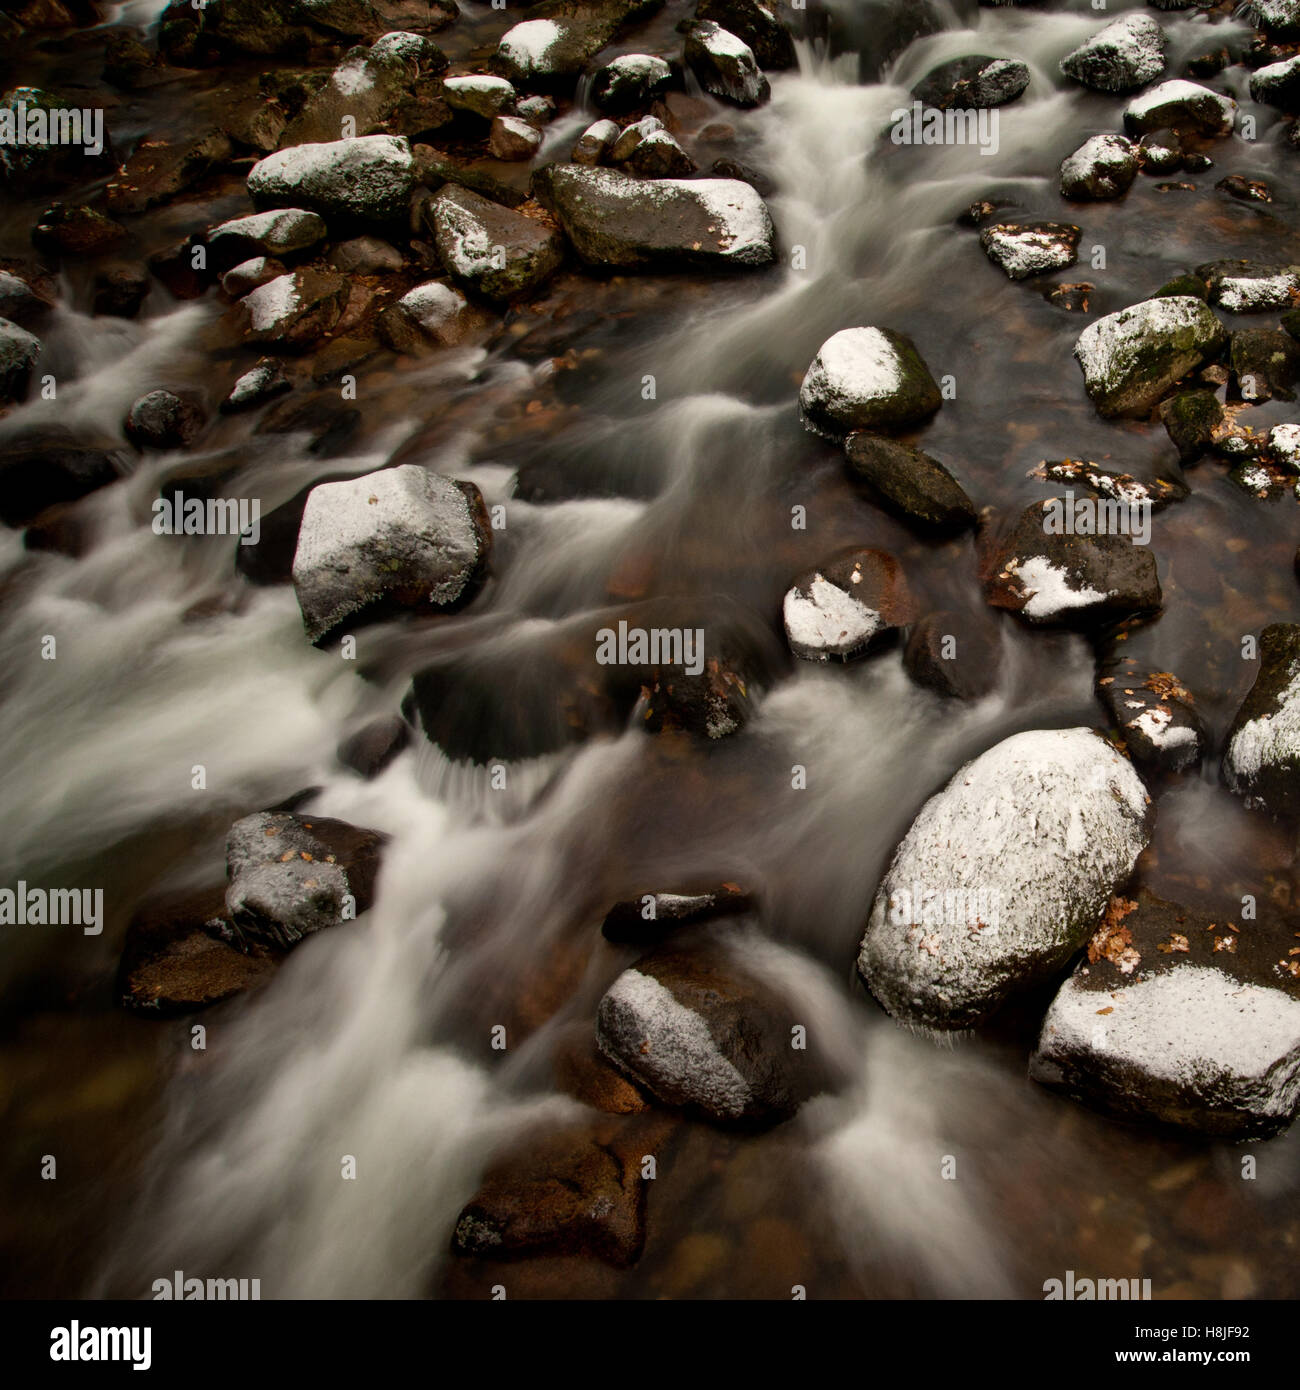 River Plym on Dartmoor National Park during winter with snow covered boulders and icy water. Stock Photo